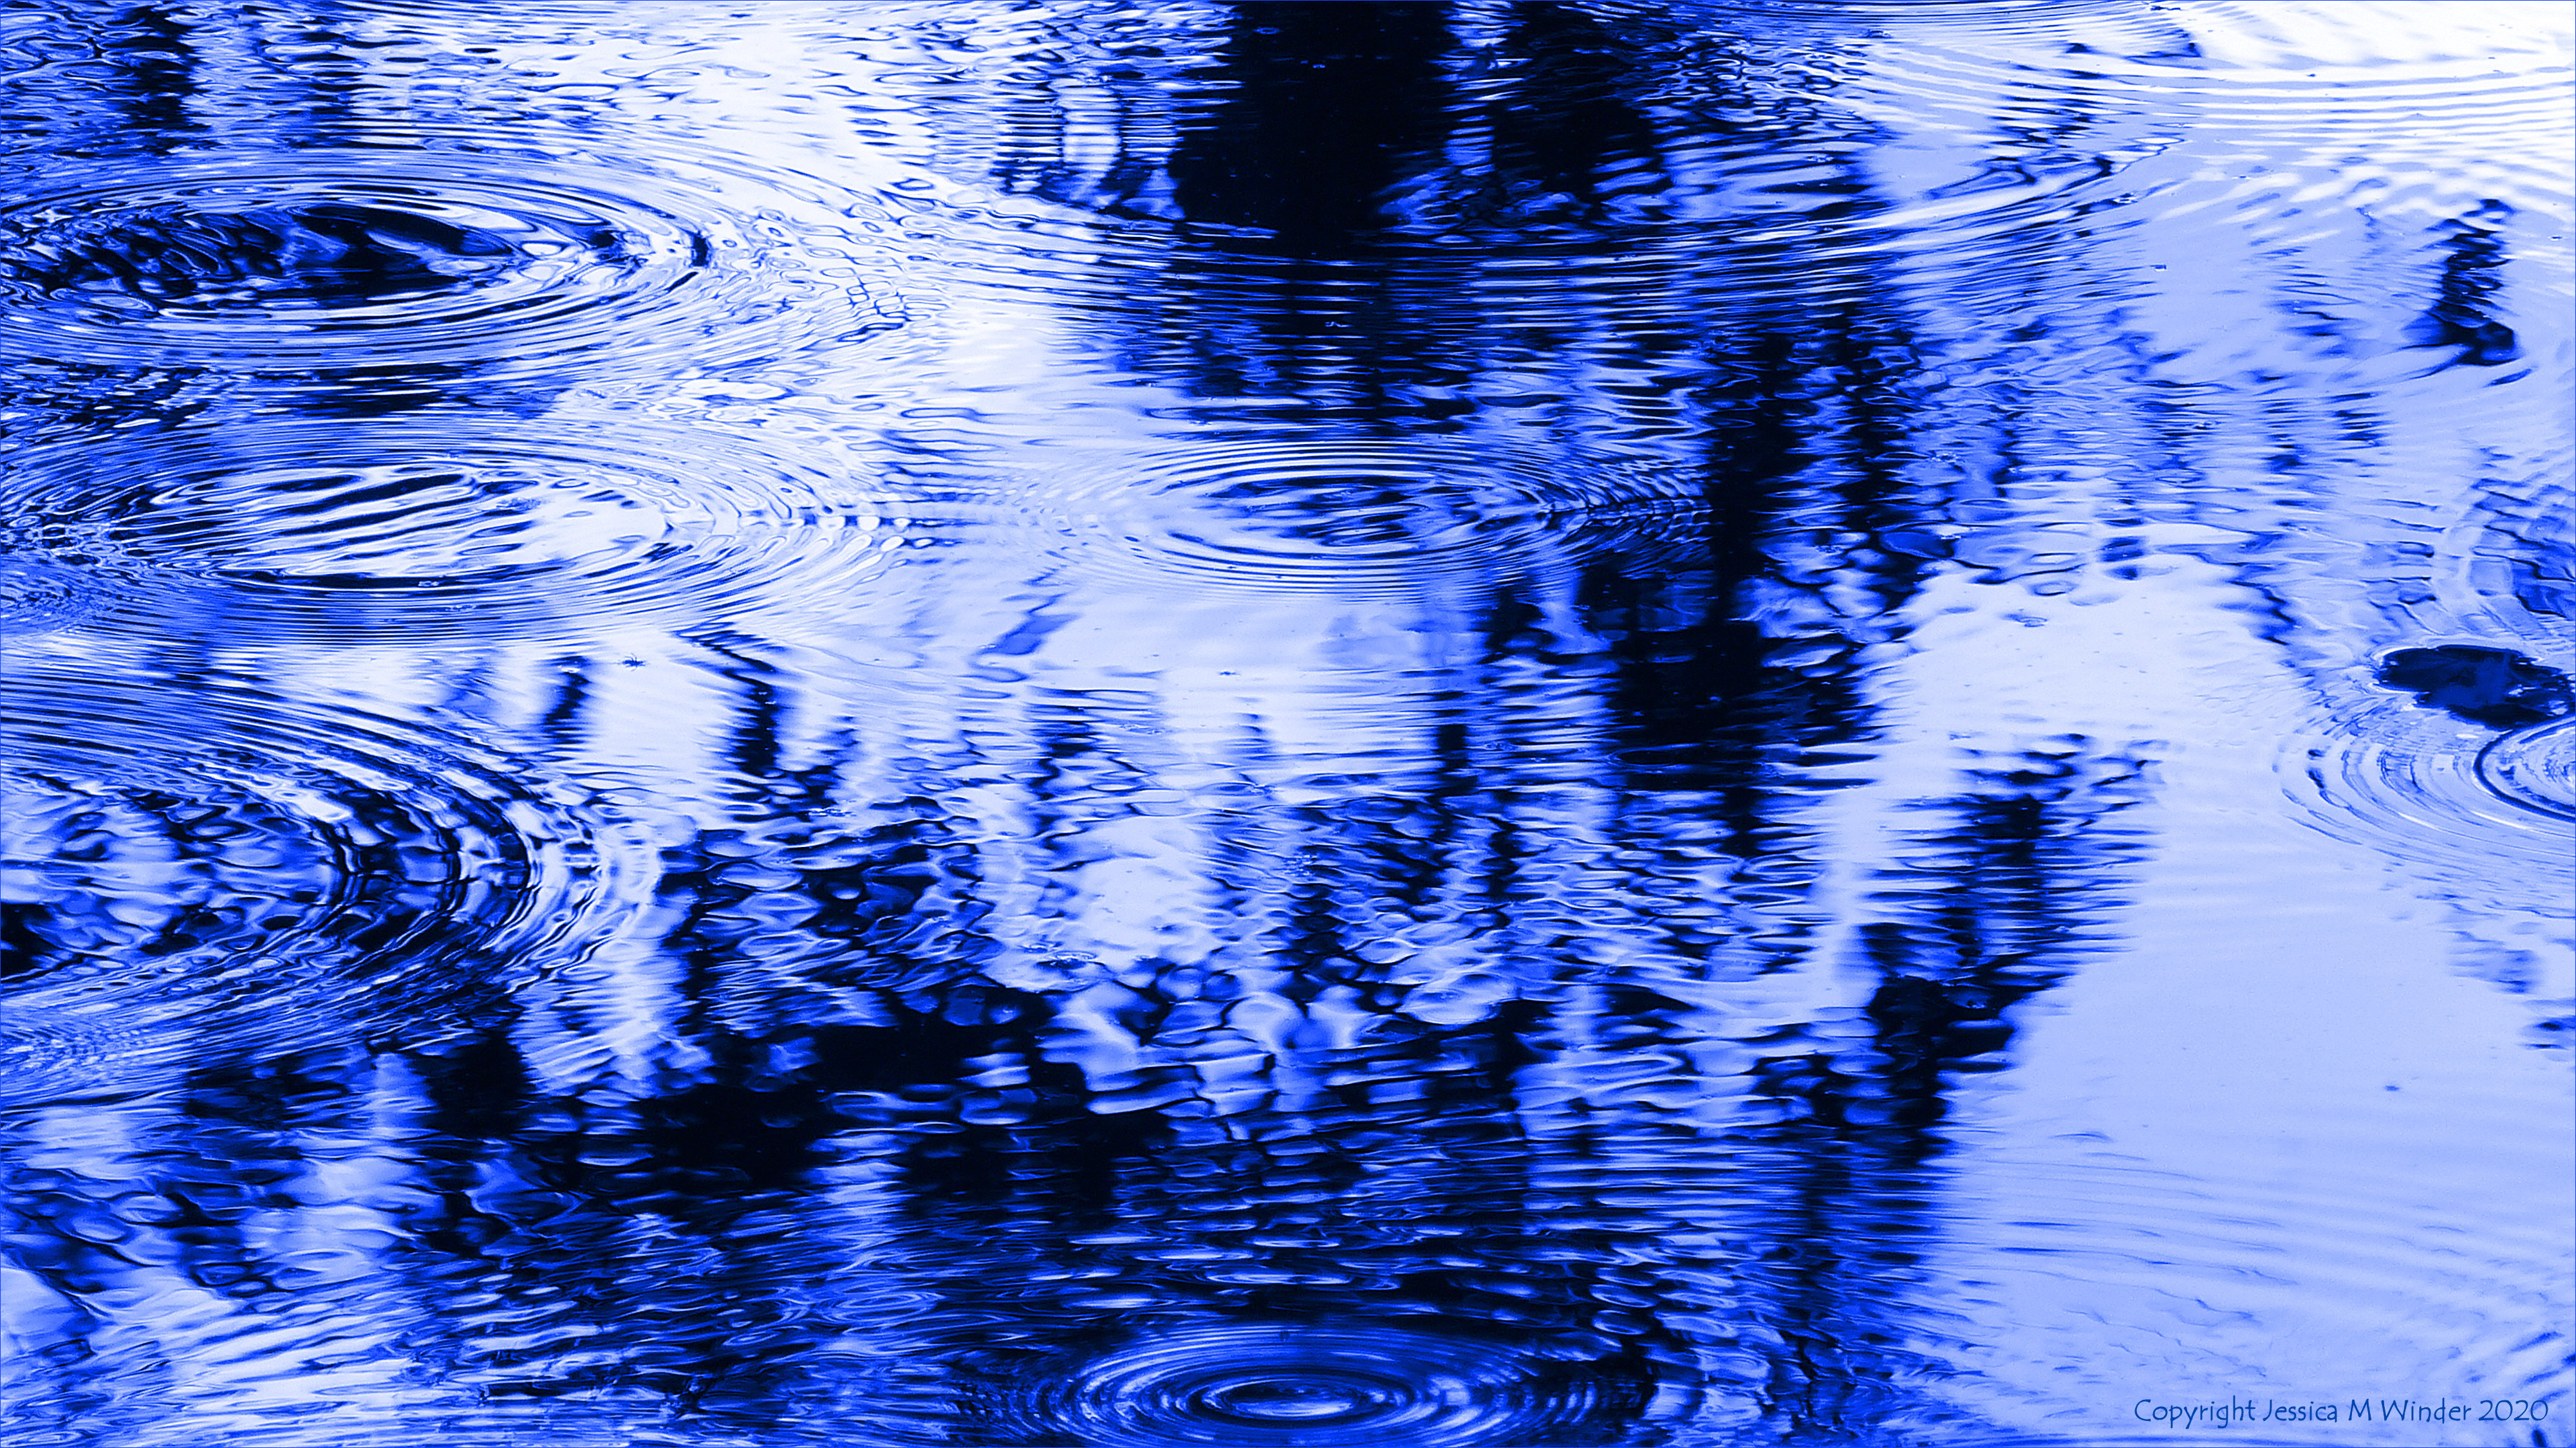 Concentric ripple patterns on water